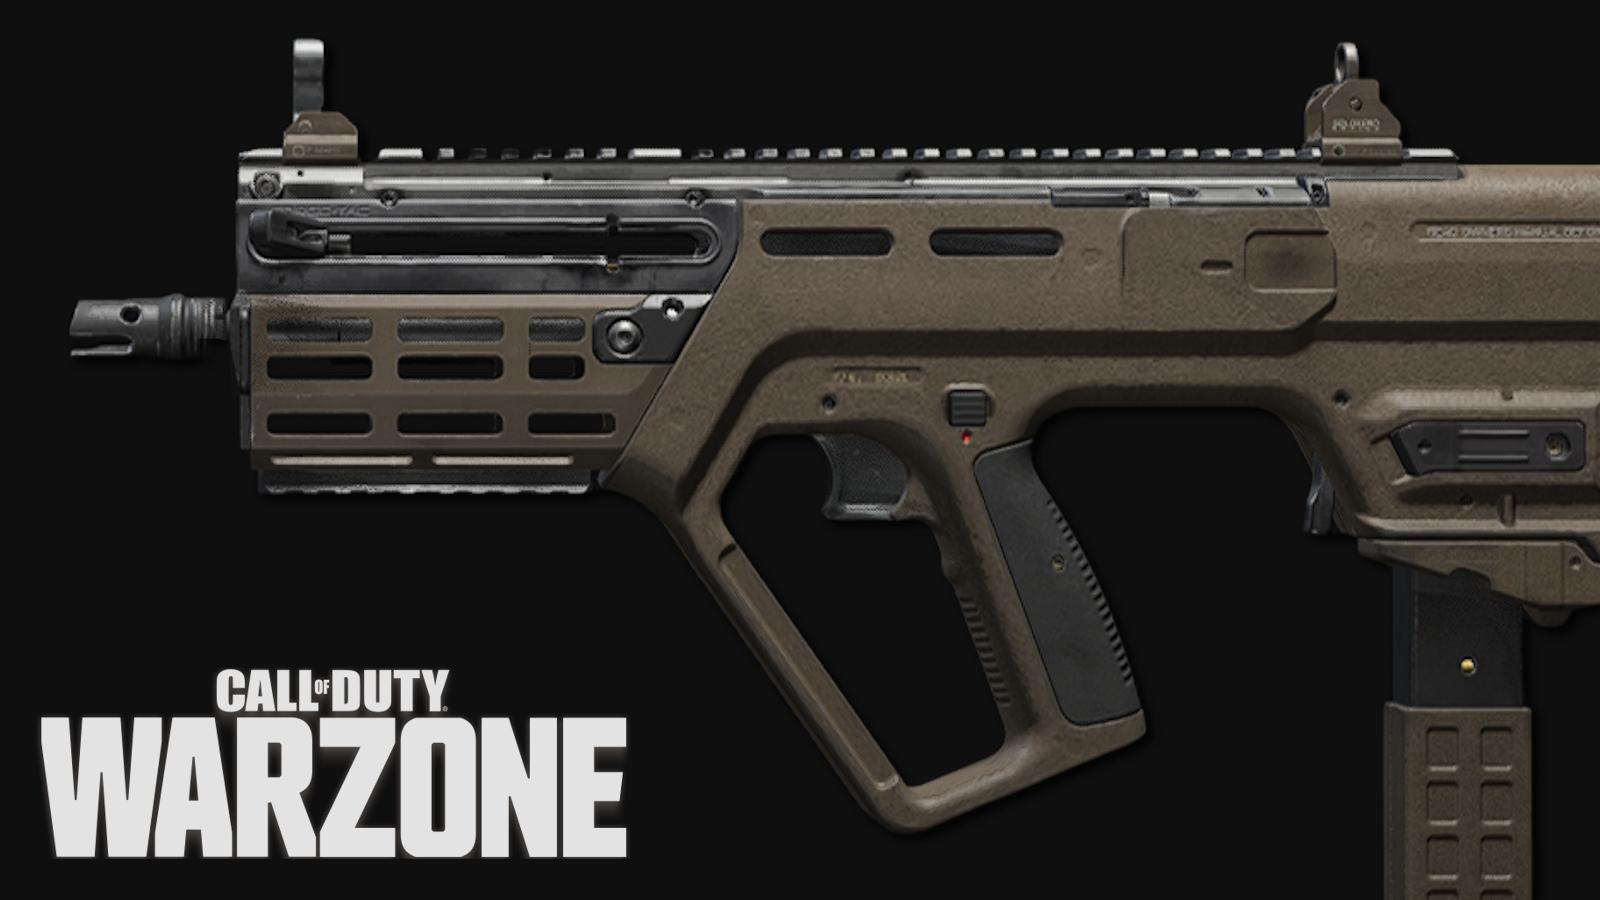 The RAM-9 SMG in Warzone.